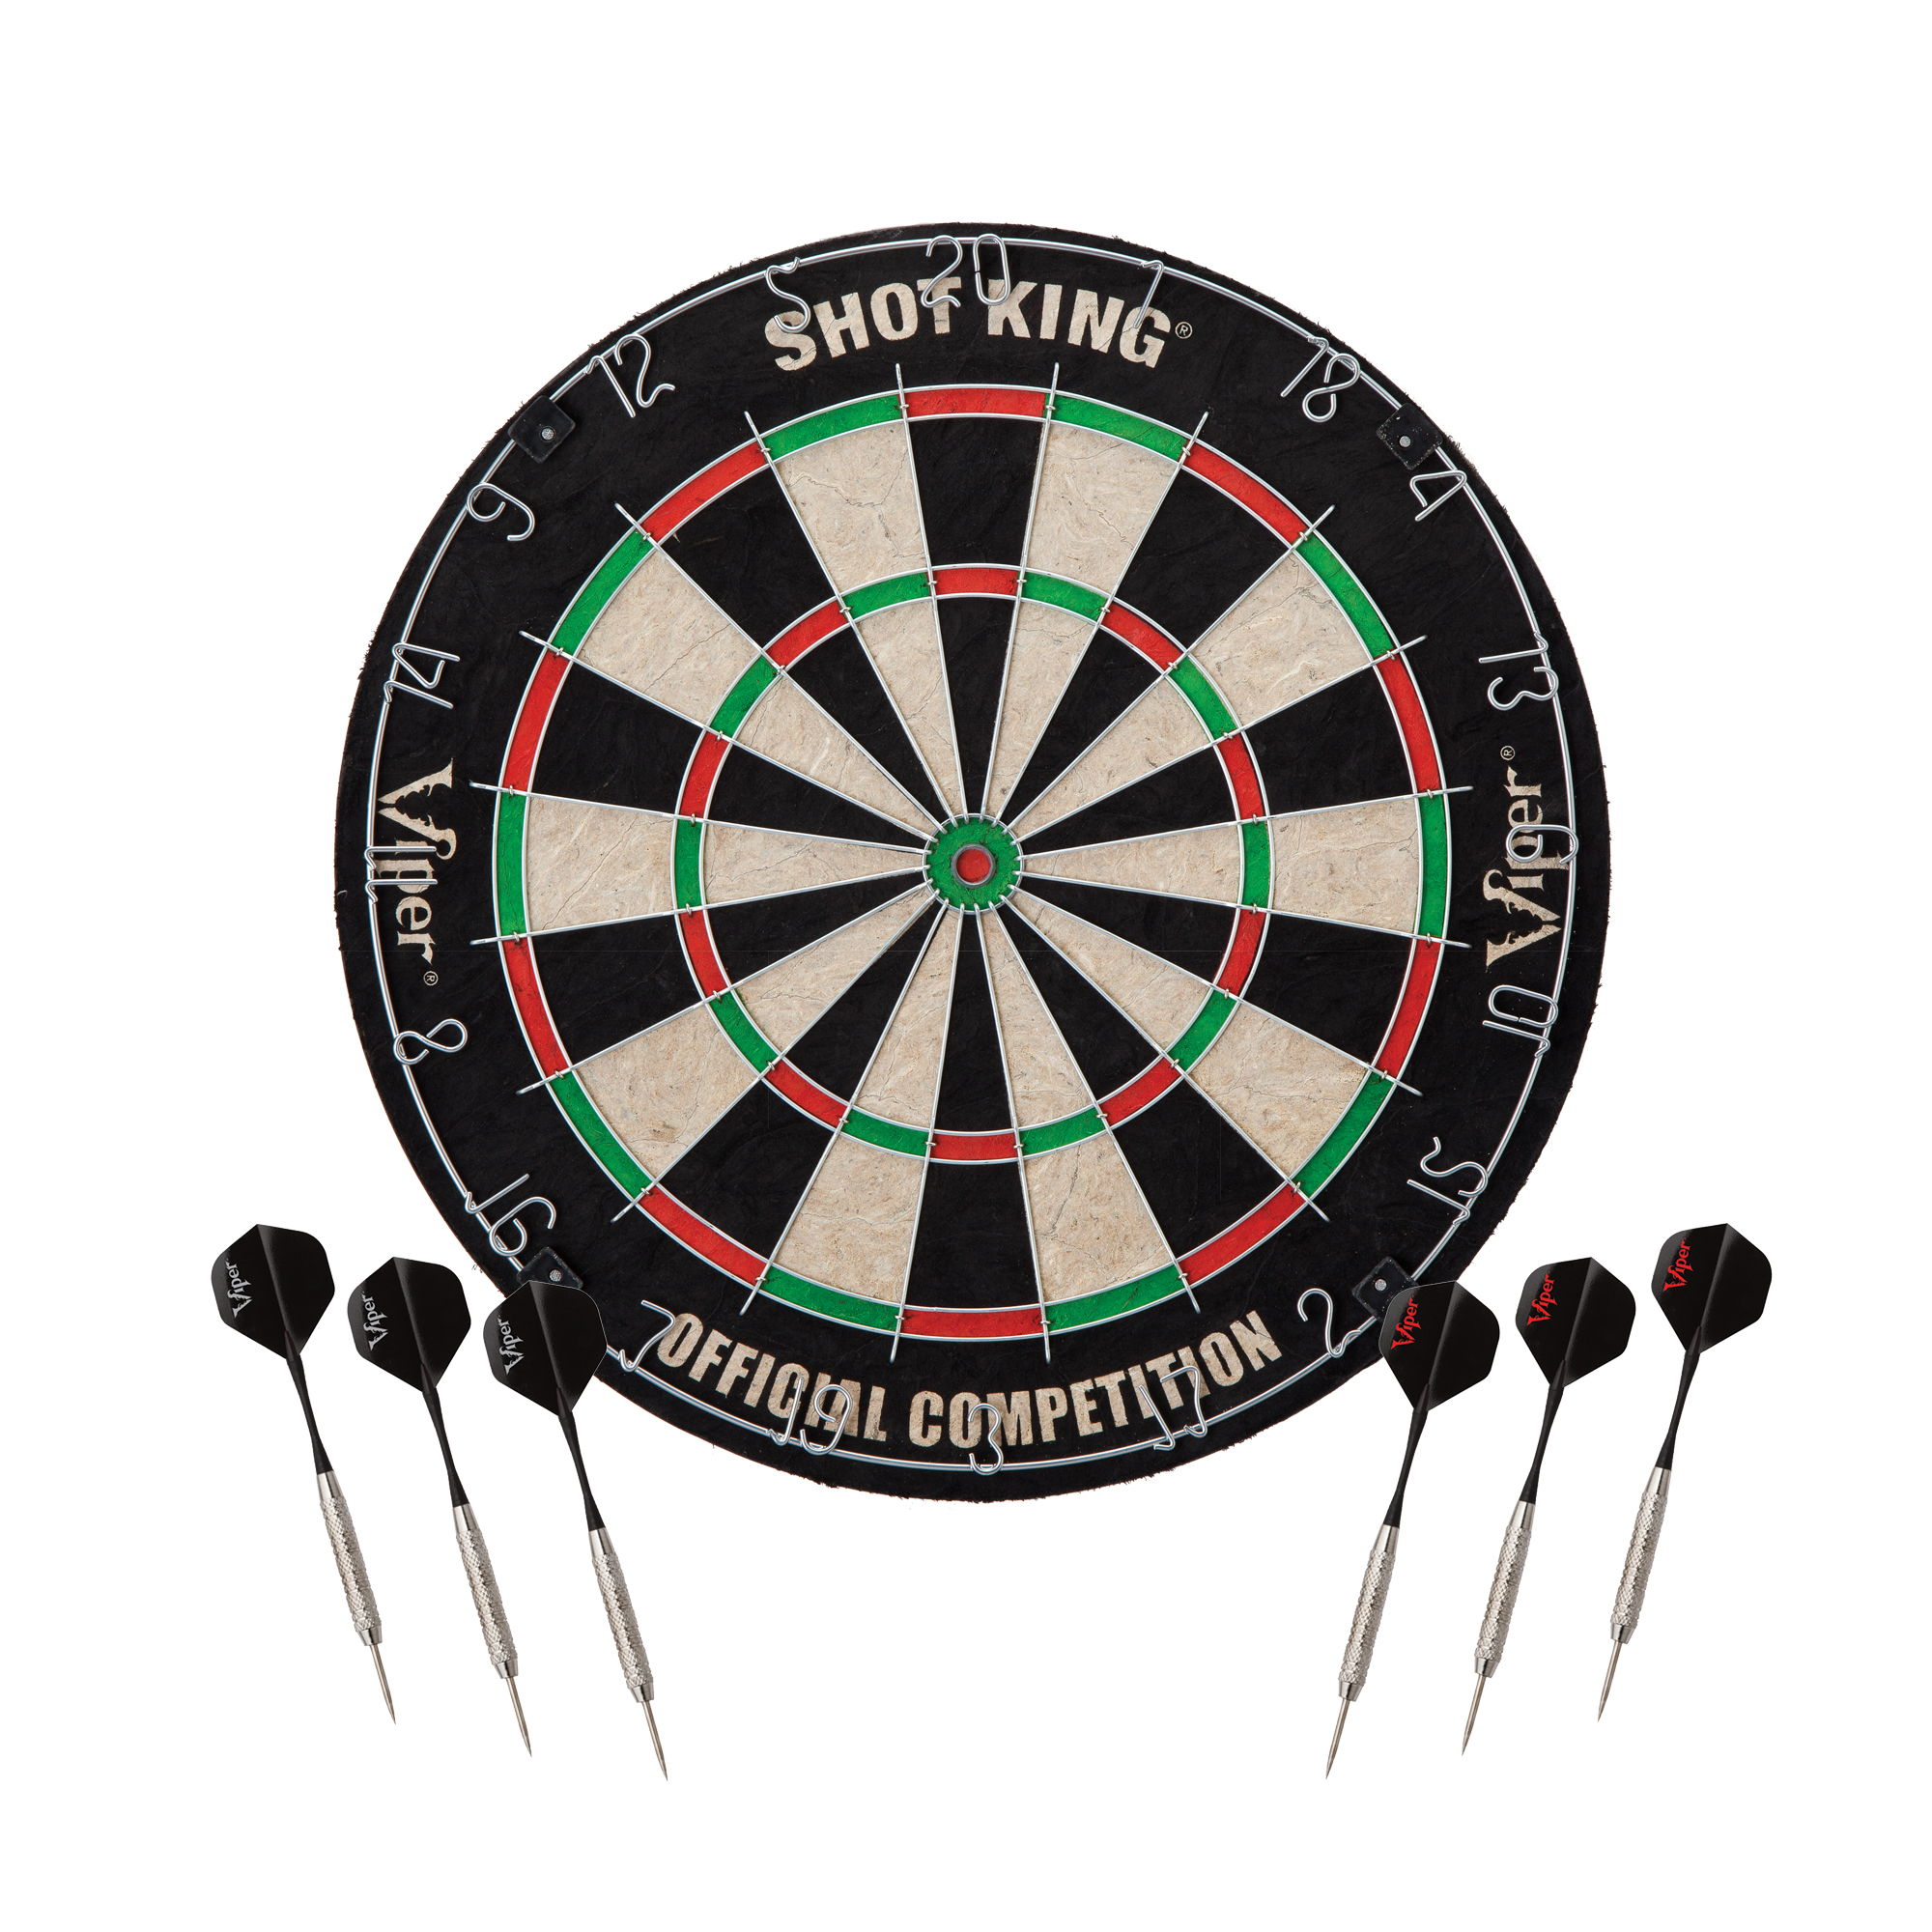 Viper Shot King Regulation Bristle Steel Tip Dartboard Set with Staple-Free Bullseye, Galvanized Metal Spider Wire; High-Grade Compressed Sisal with Rotating Number Ring, Includes 6 Darts - image 1 of 11